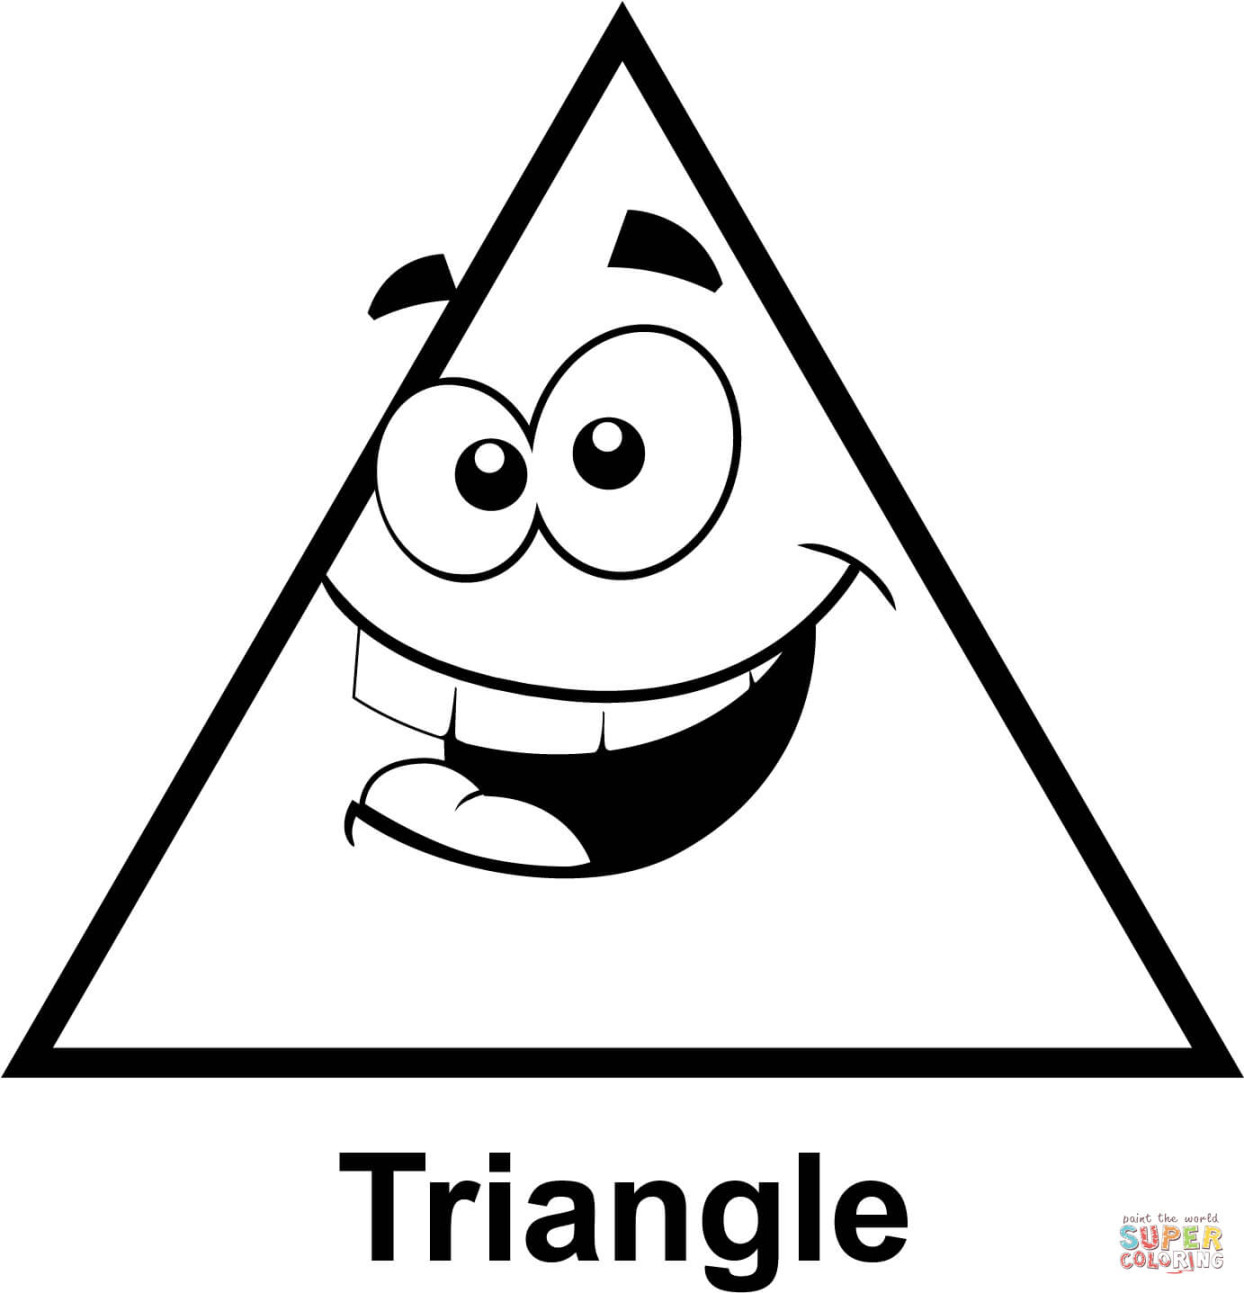 Triangle with Cartoon Face coloring page  Free Printable Coloring